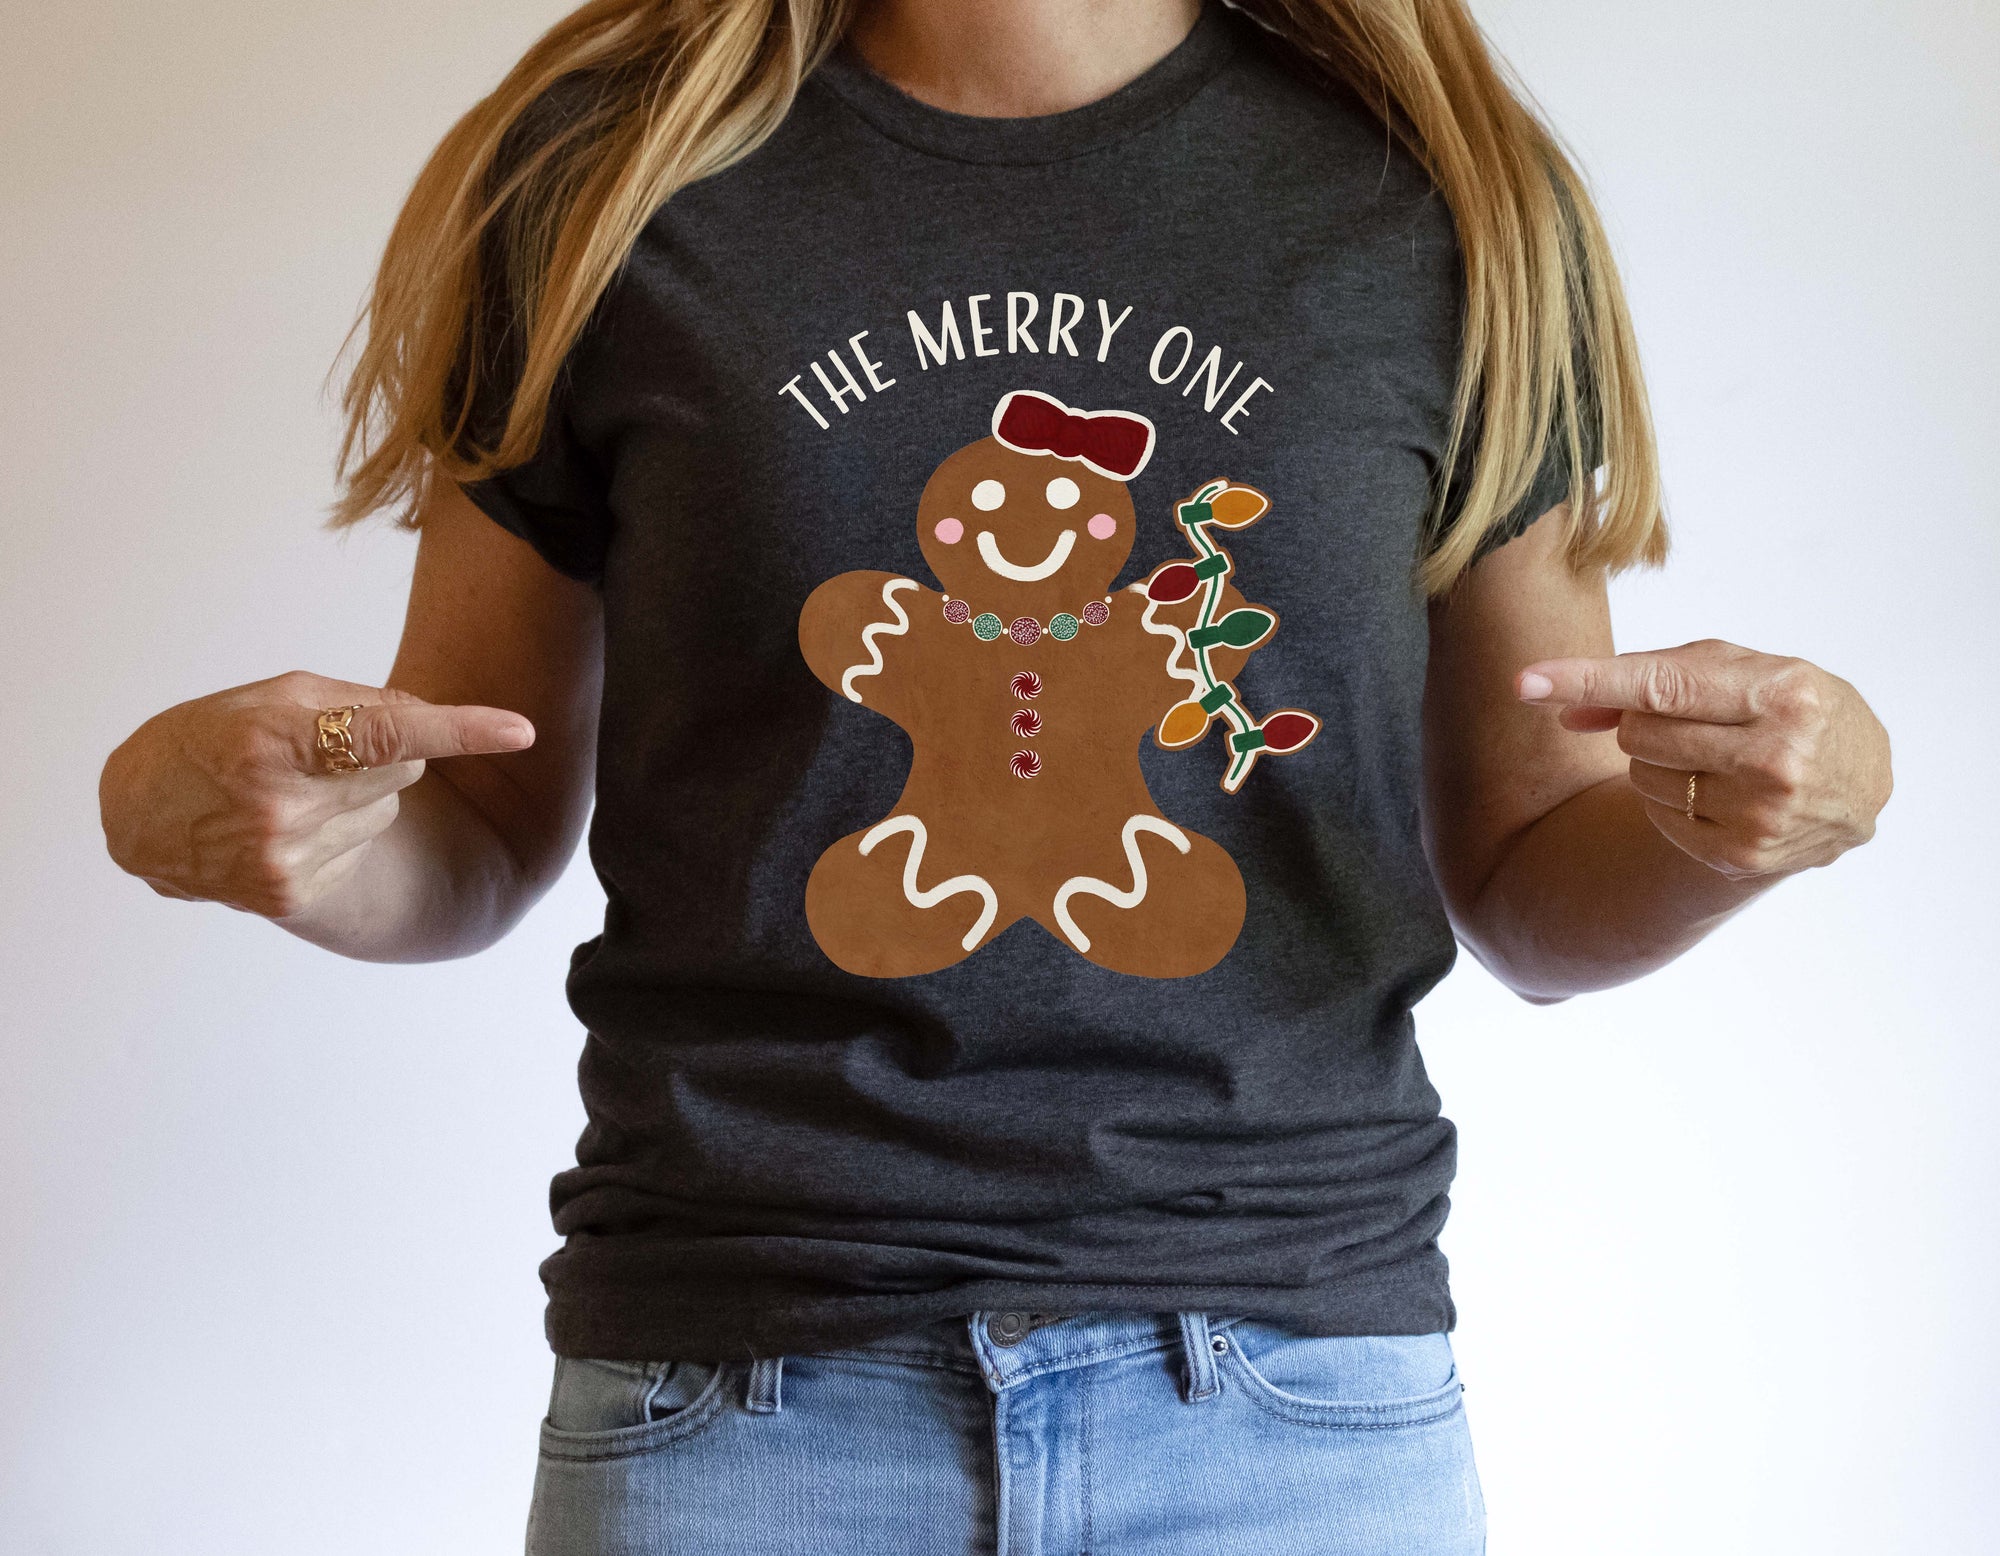 The Merry One Gingerbread Girl Shirt